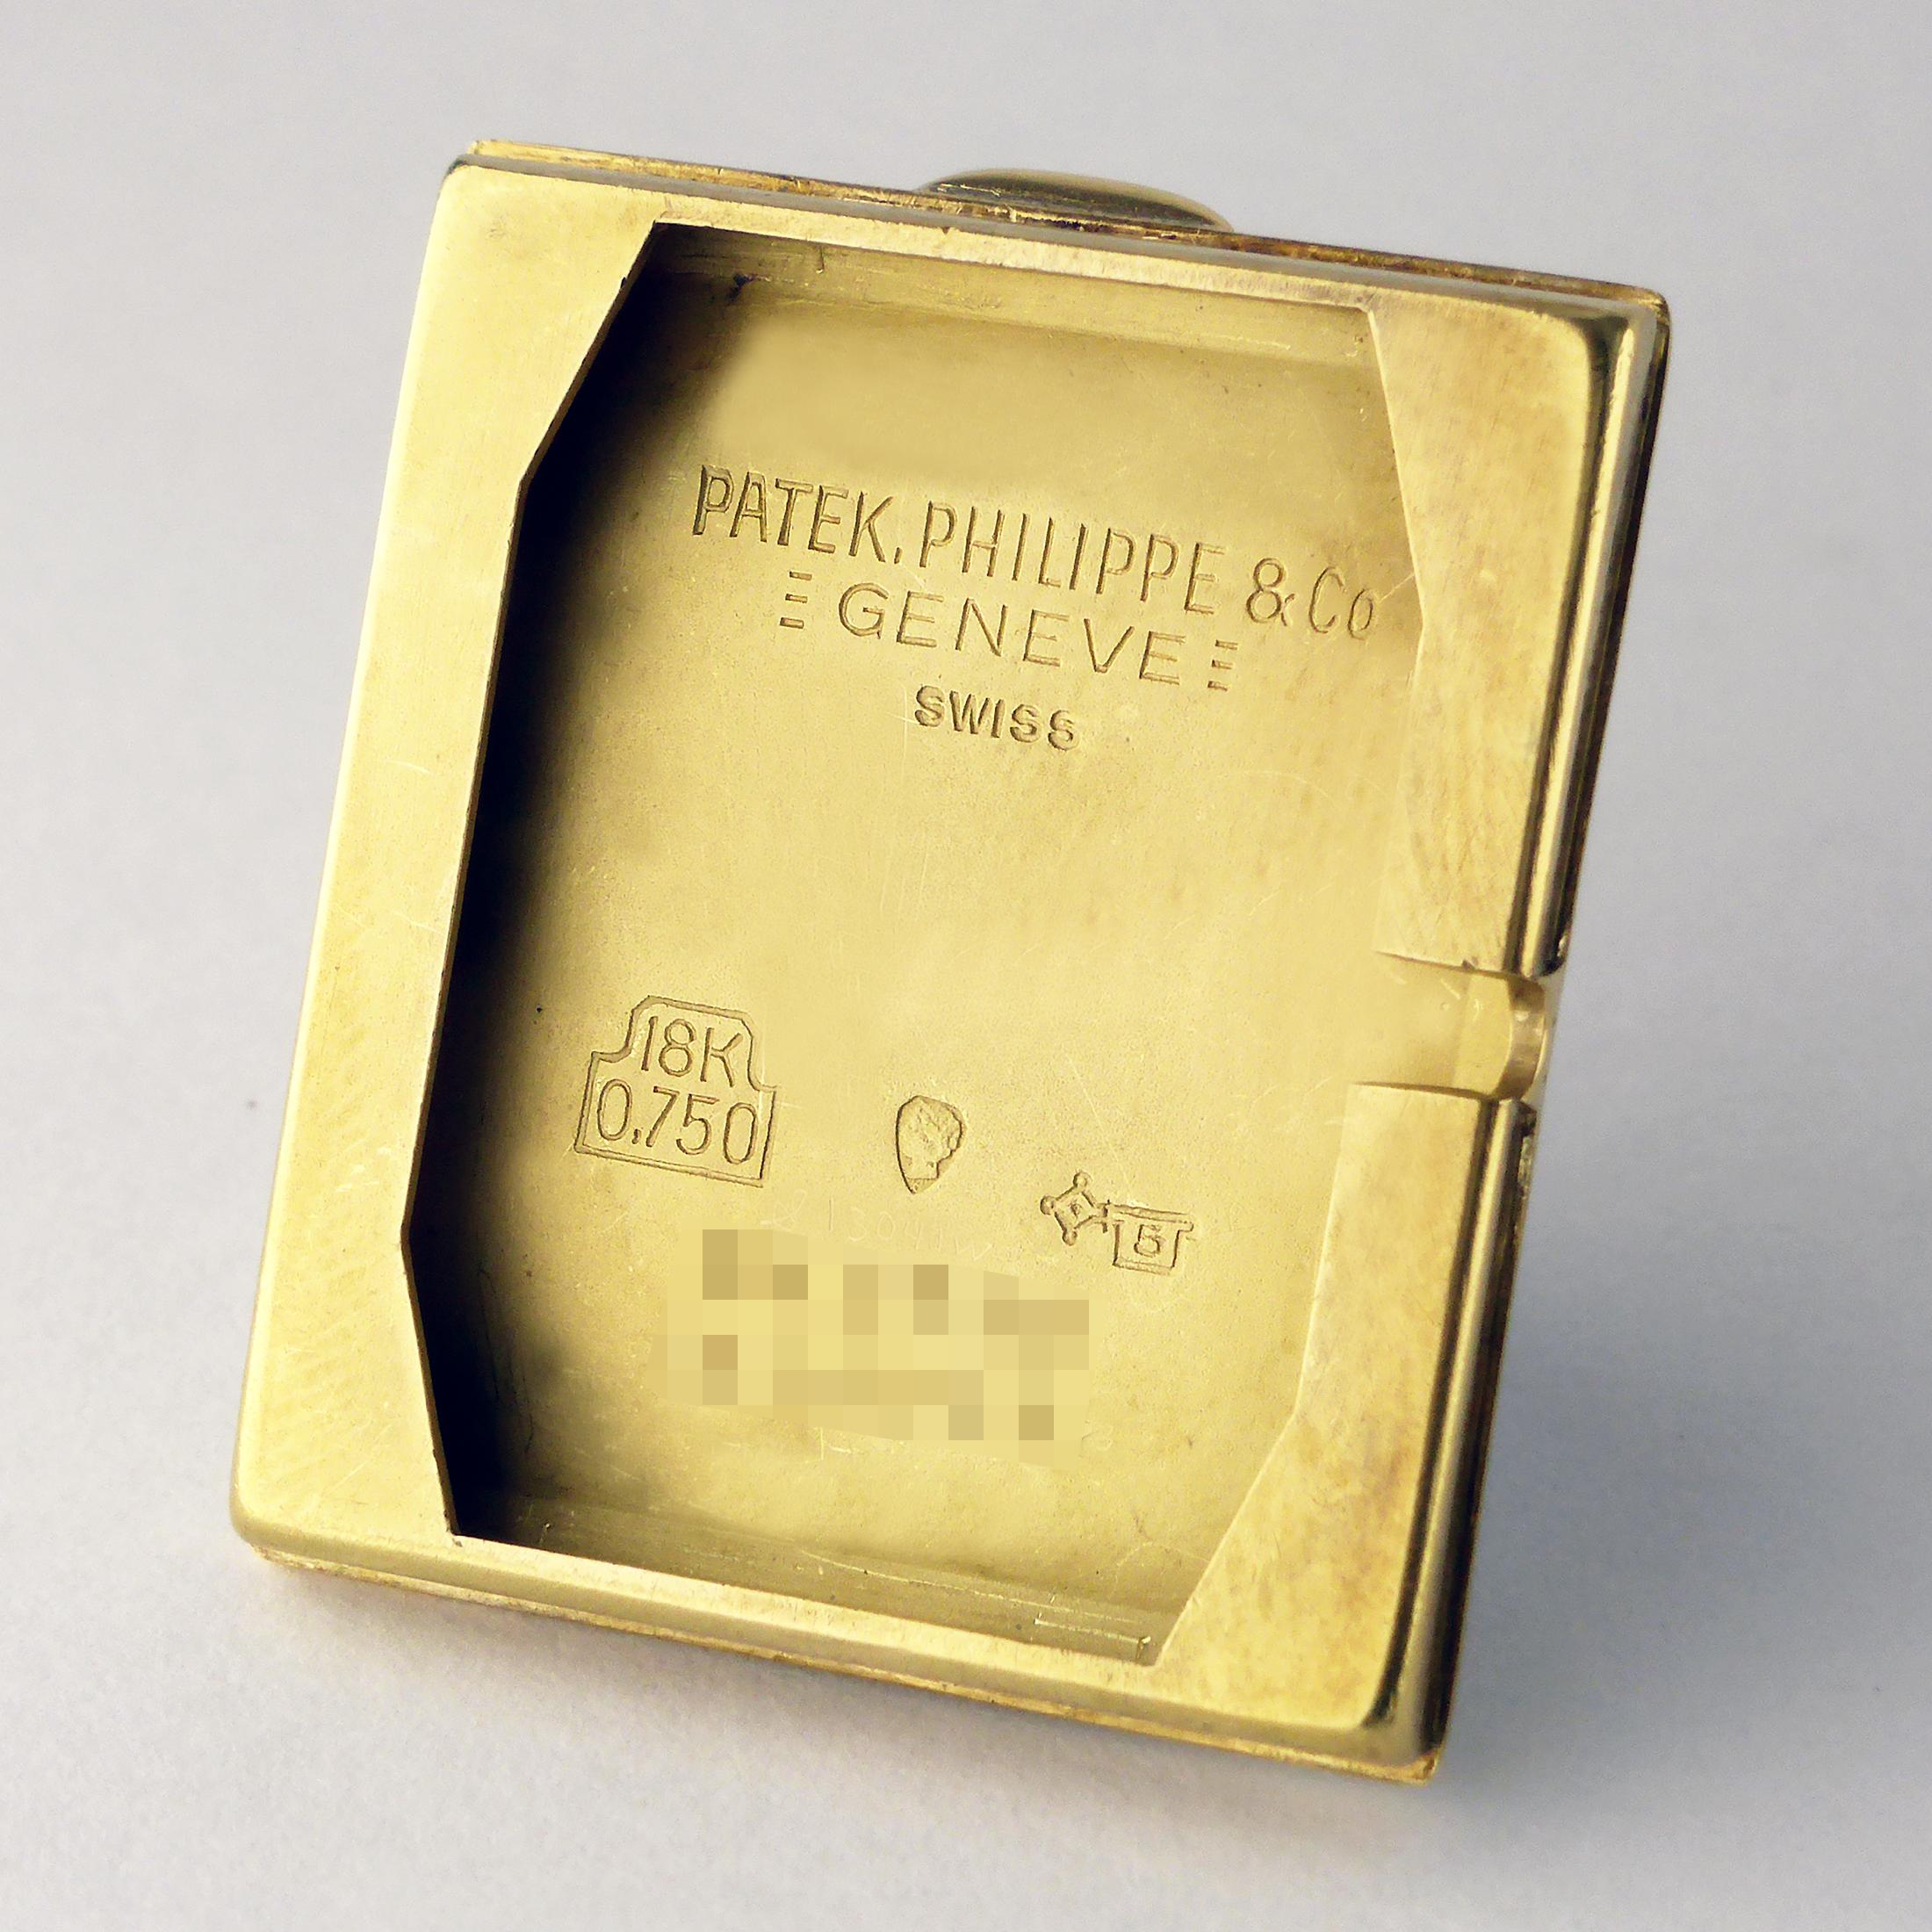 Patek Philippe Gold Wristwatch Dated 1951 For Sale 5